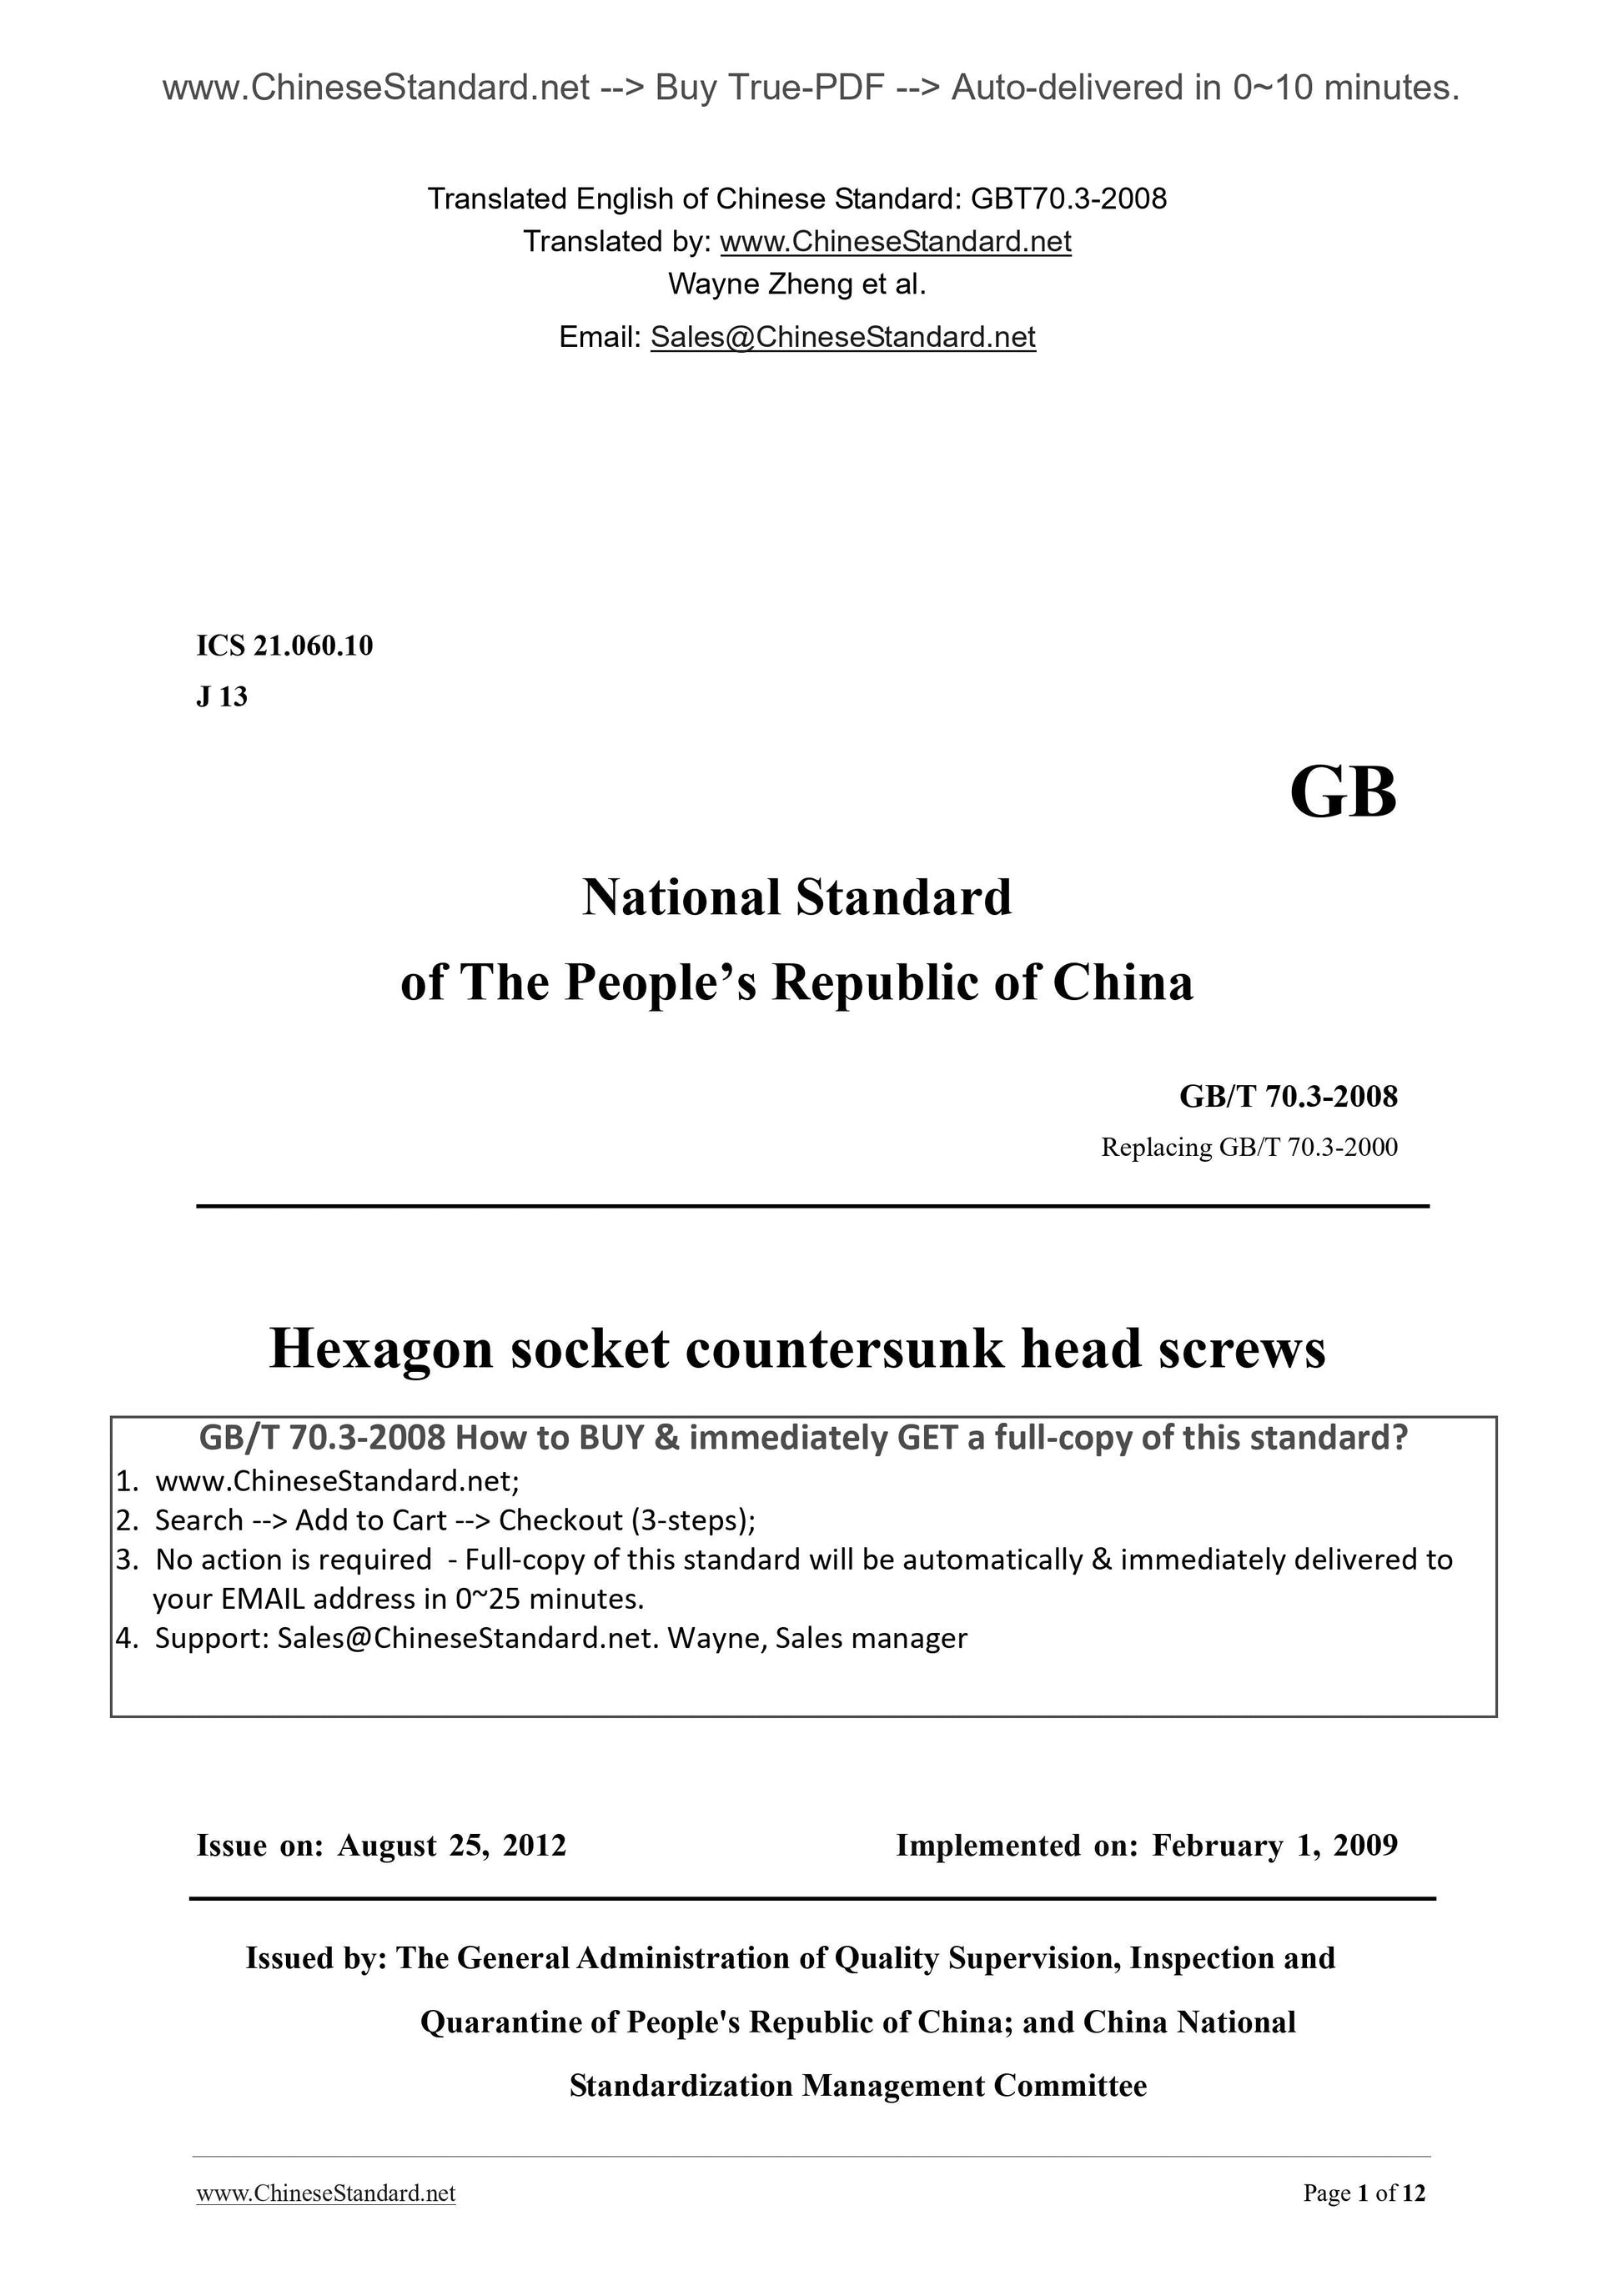 GB/T 70.3-2008 Page 1